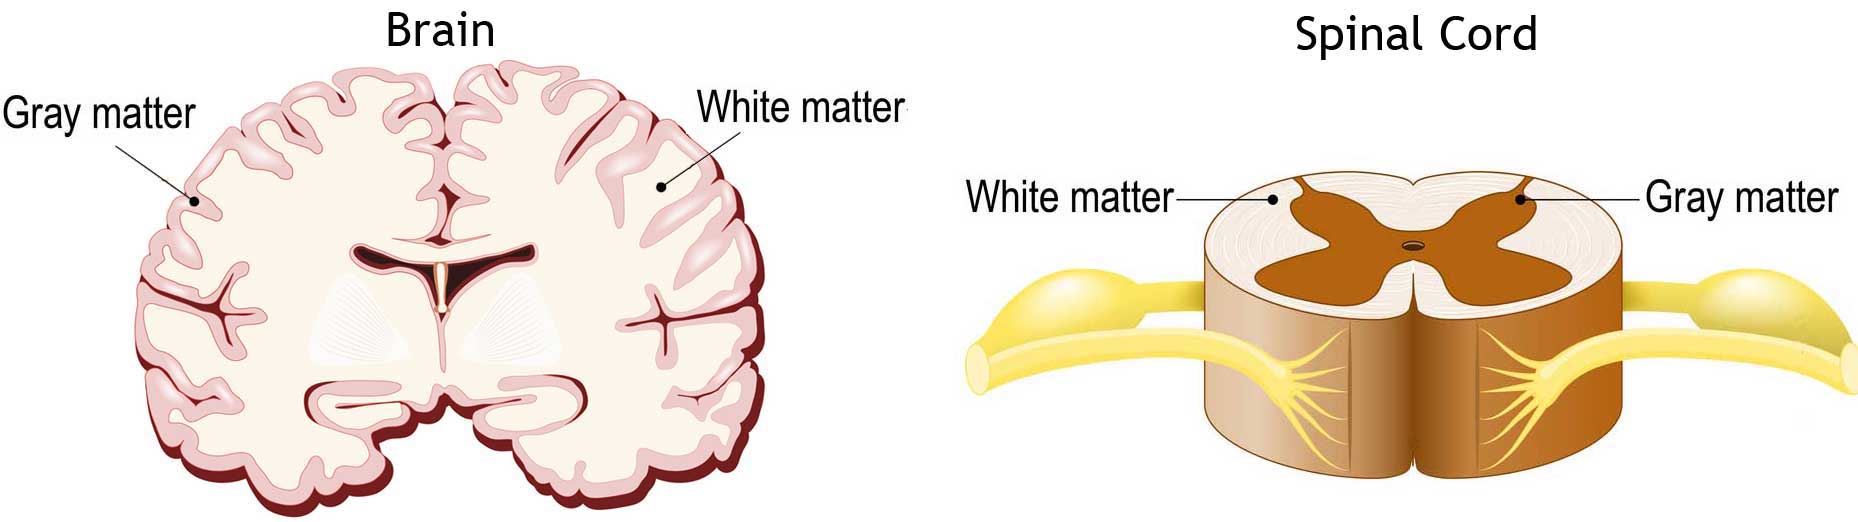 spinal cord white matter